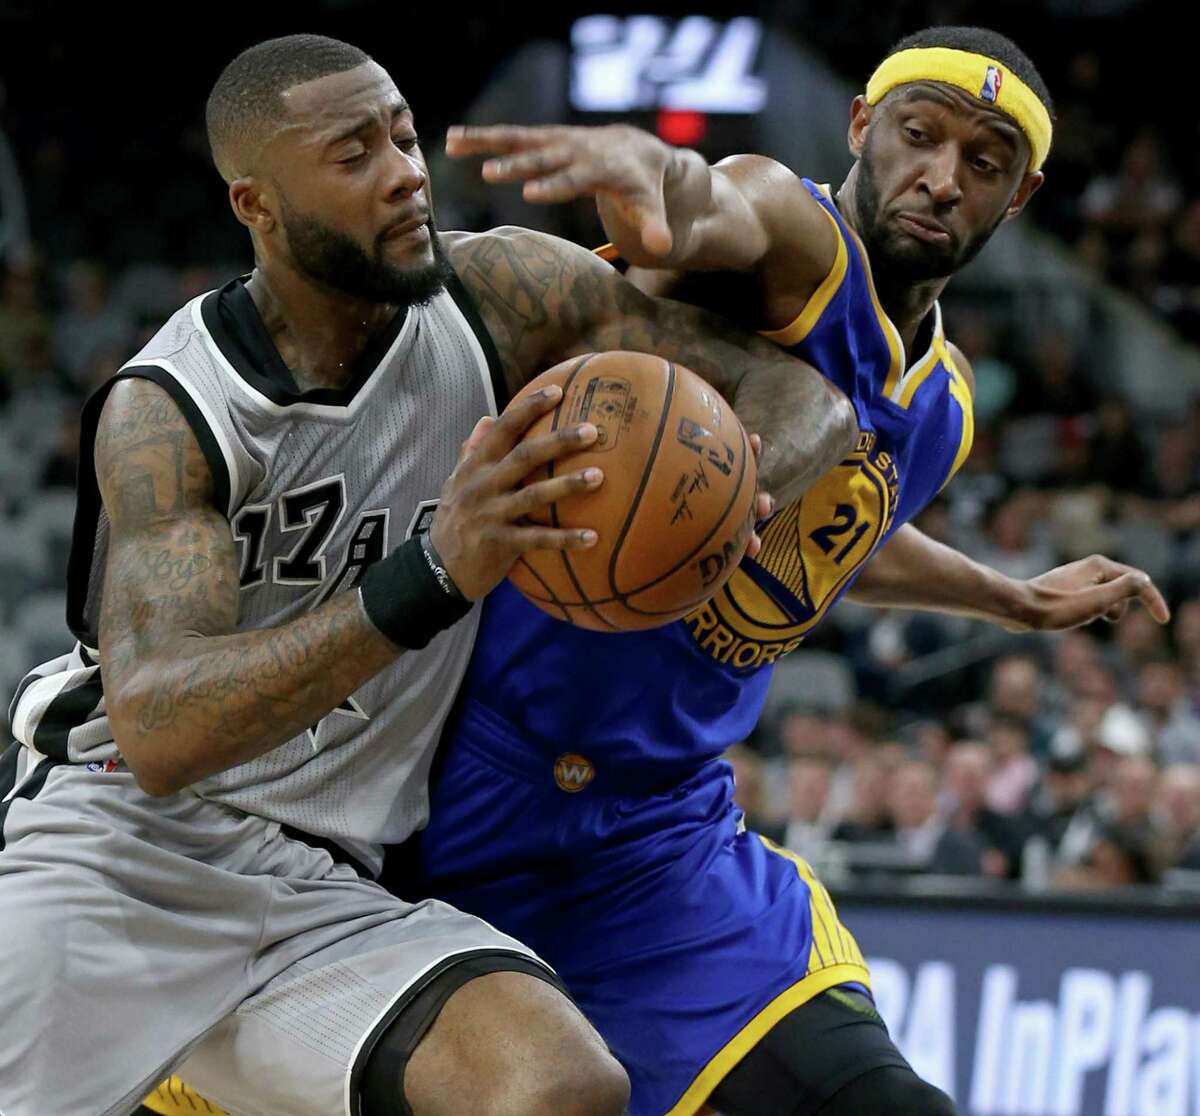 Spurs’ Jonathon Simmons looks for room around the Golden State Warriors’ Ian Clark during second half action on March 11, 2017 at the AT&T Center.